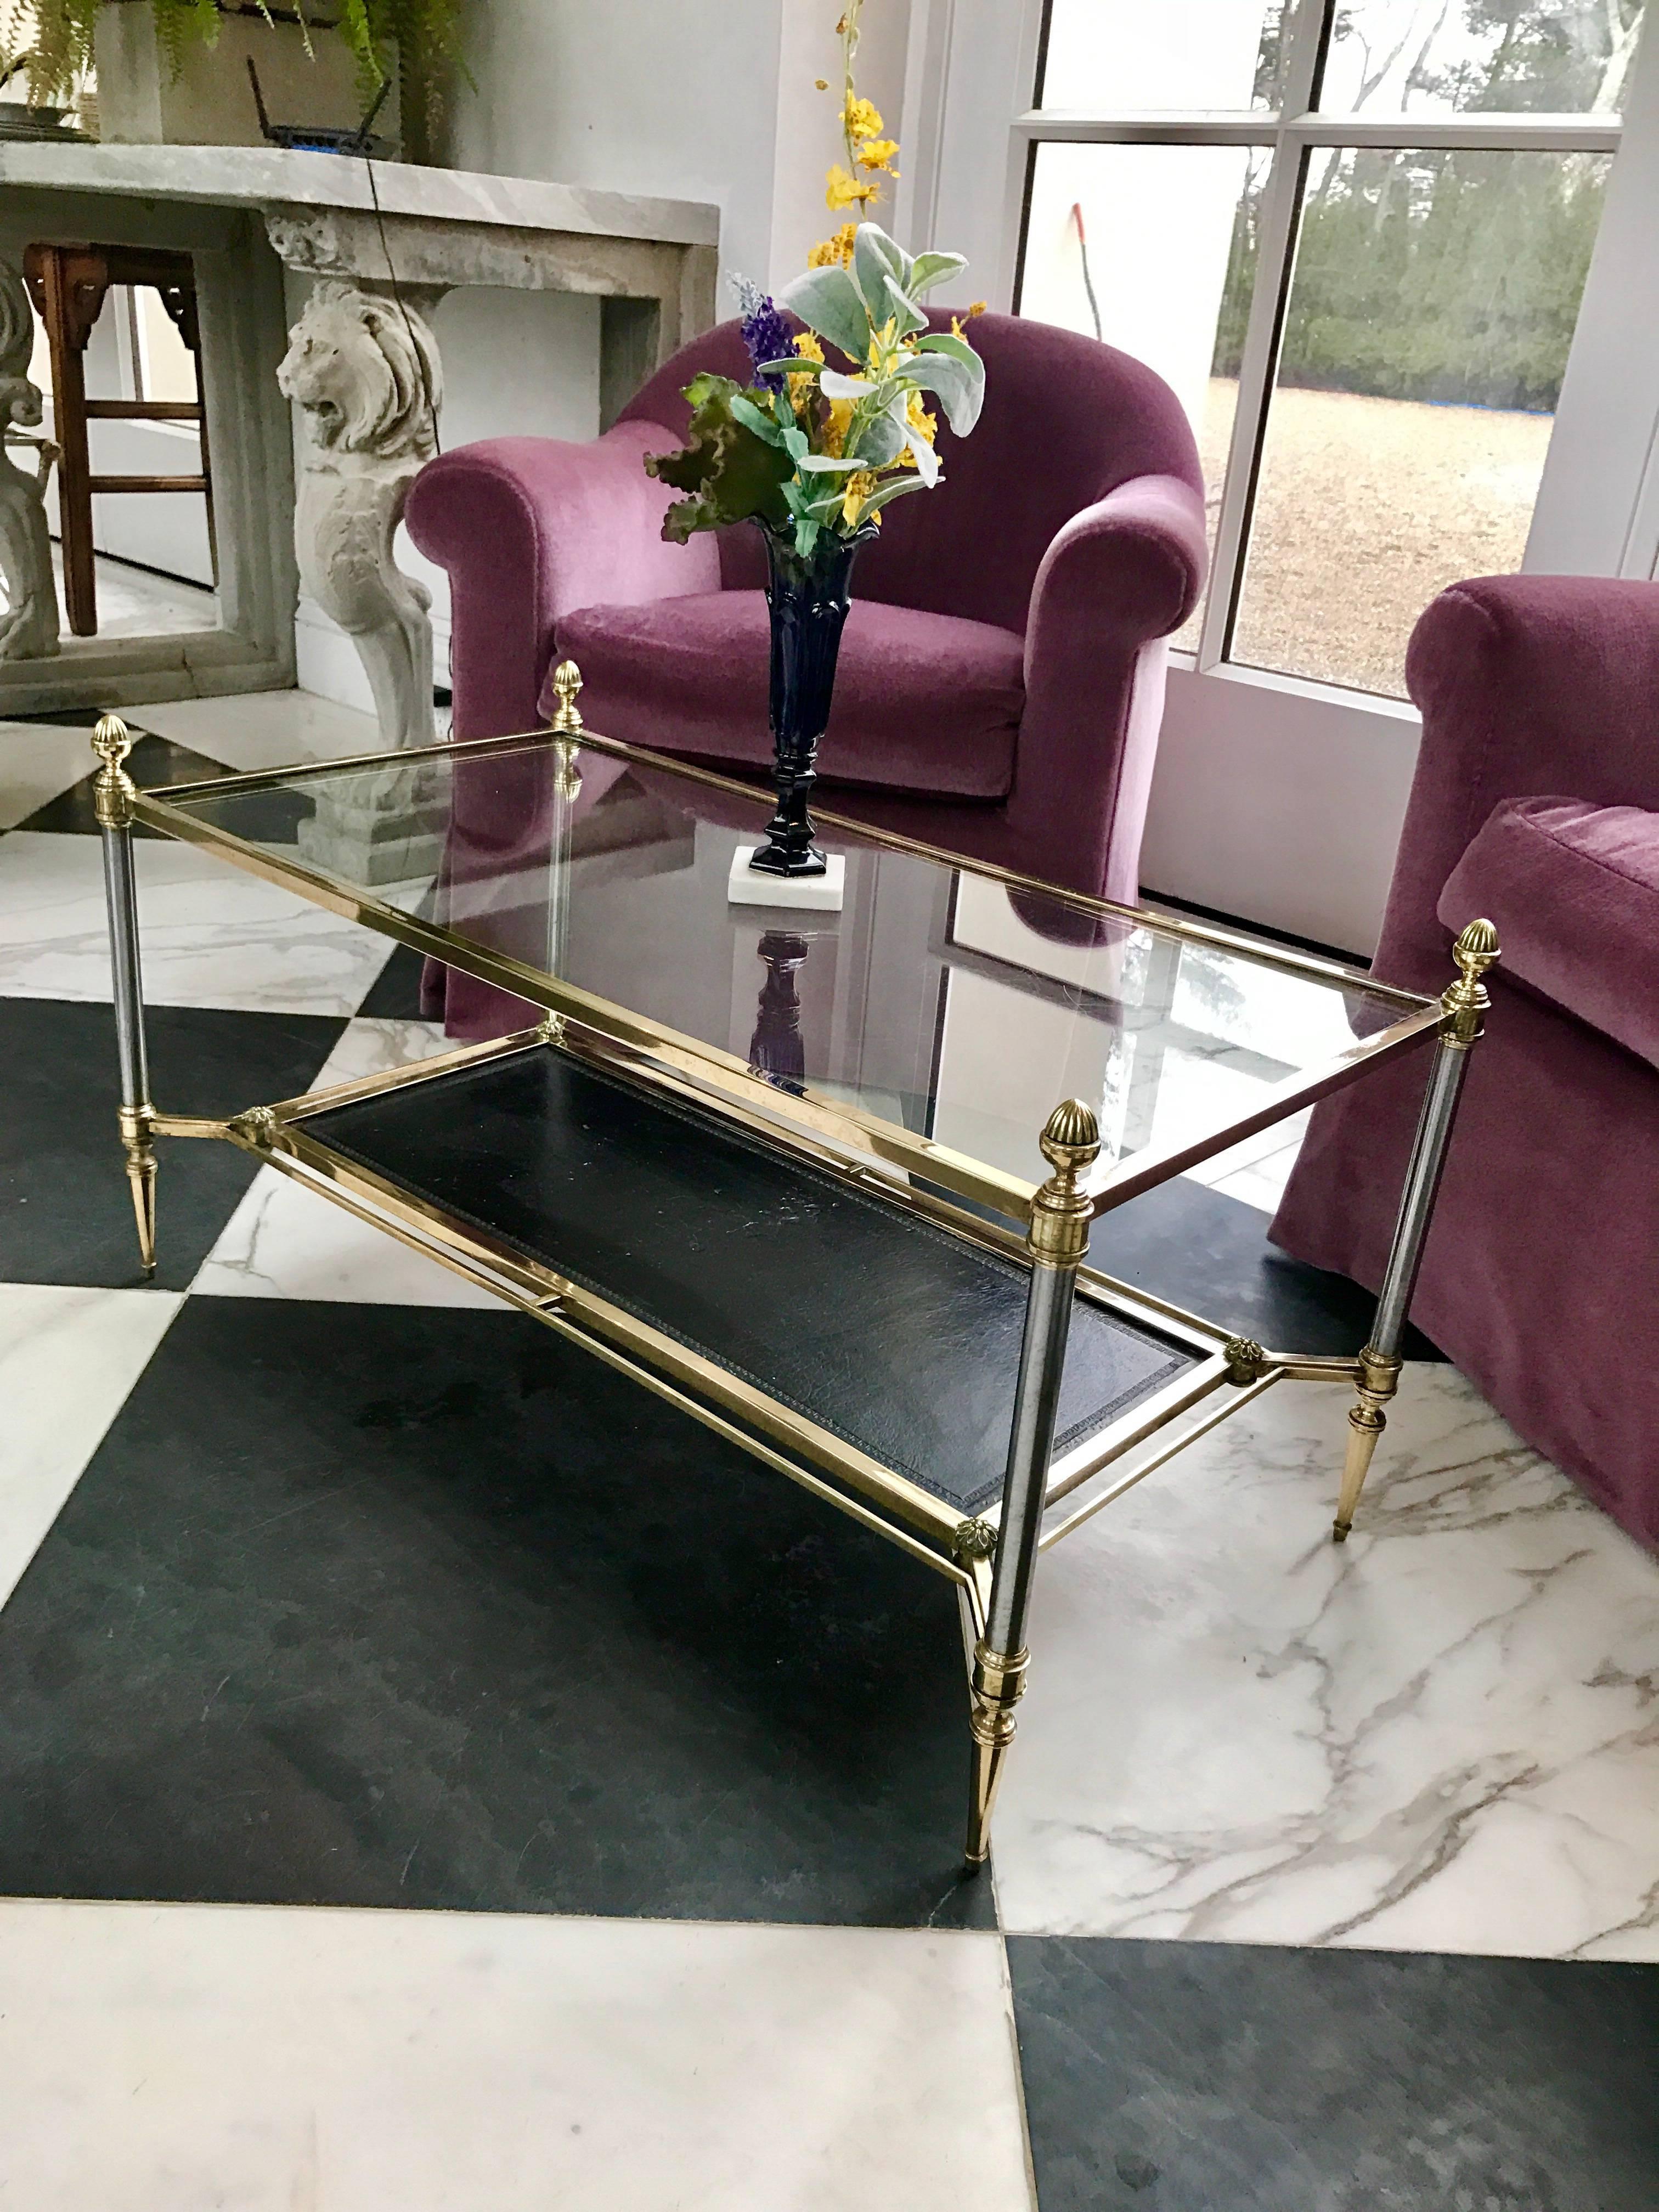 This stunning Pompeian style coffee table is made of solid elements throughout. Maison Jansen at it's finest! 
The original top is crystal glass, the shelf below has the original black leather and is tooled with a Meander Pattern on the